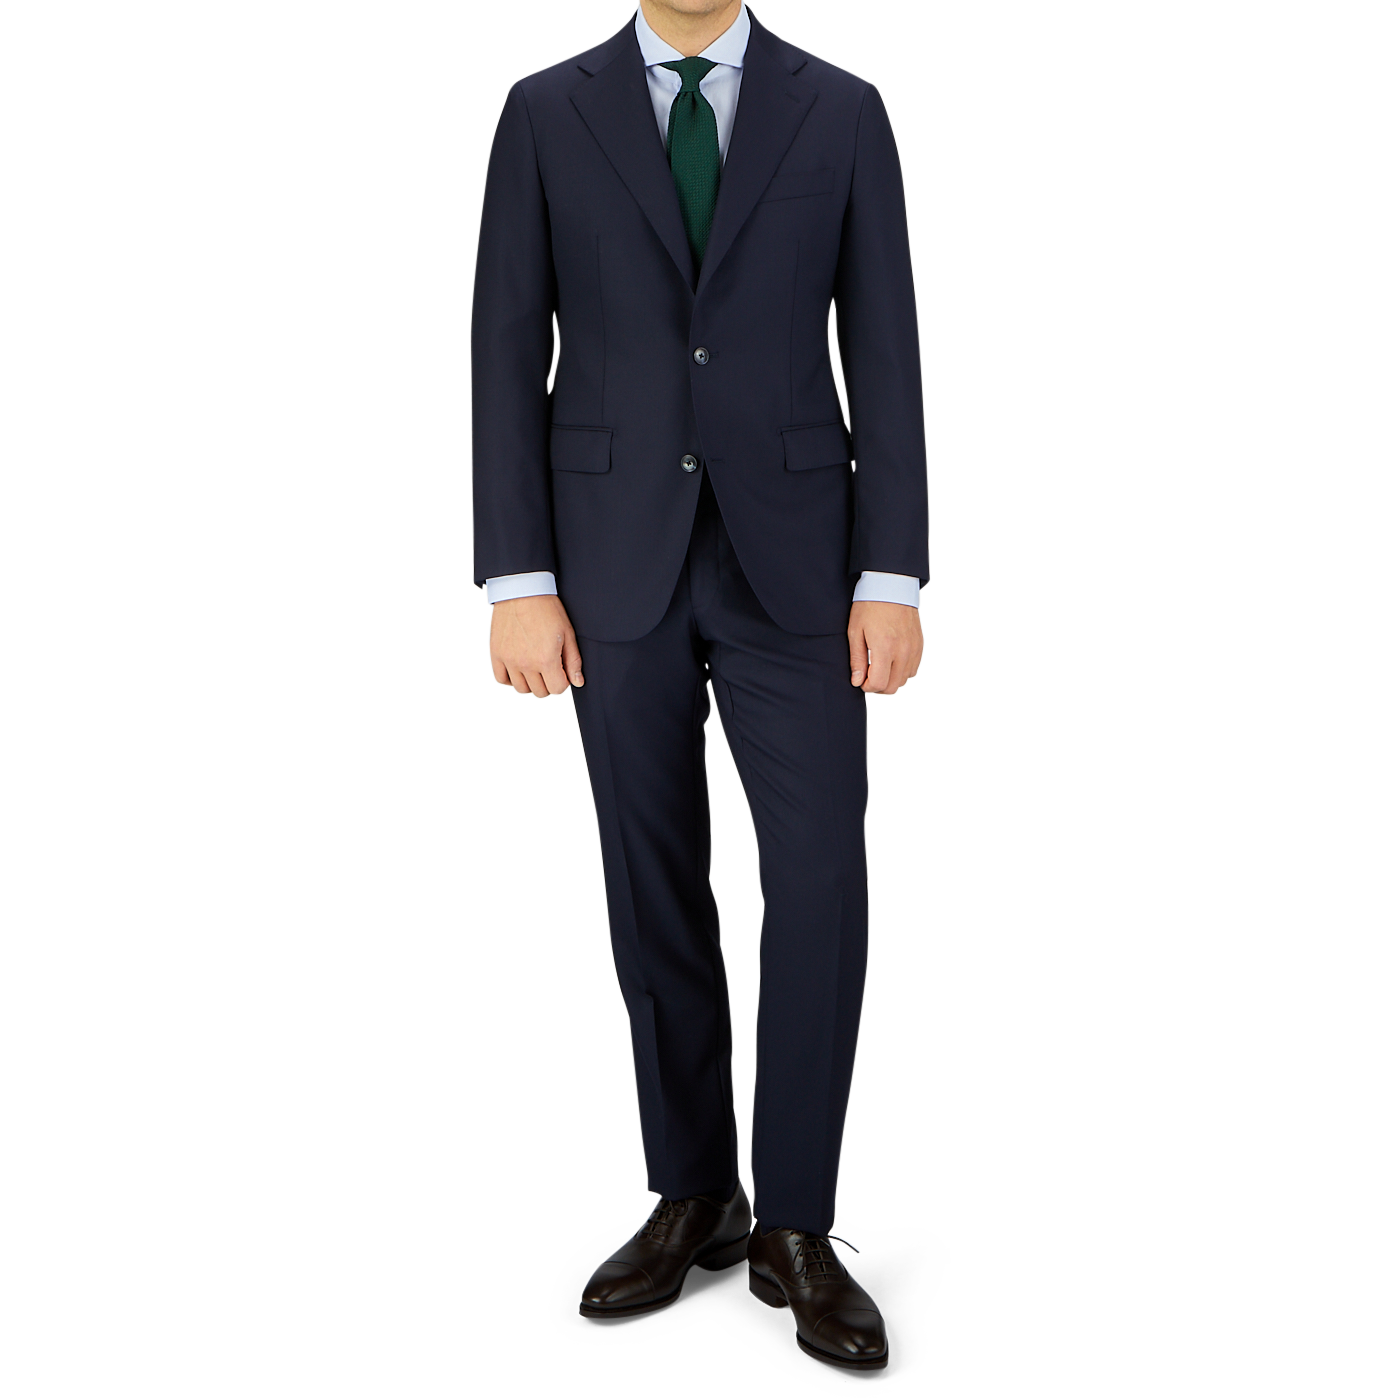 Man in a Baltzar Sartorial navy Super 100's wool suit jacket, white shirt, and green tie standing against a grey background with colorful geometrical pattern at the bottom.